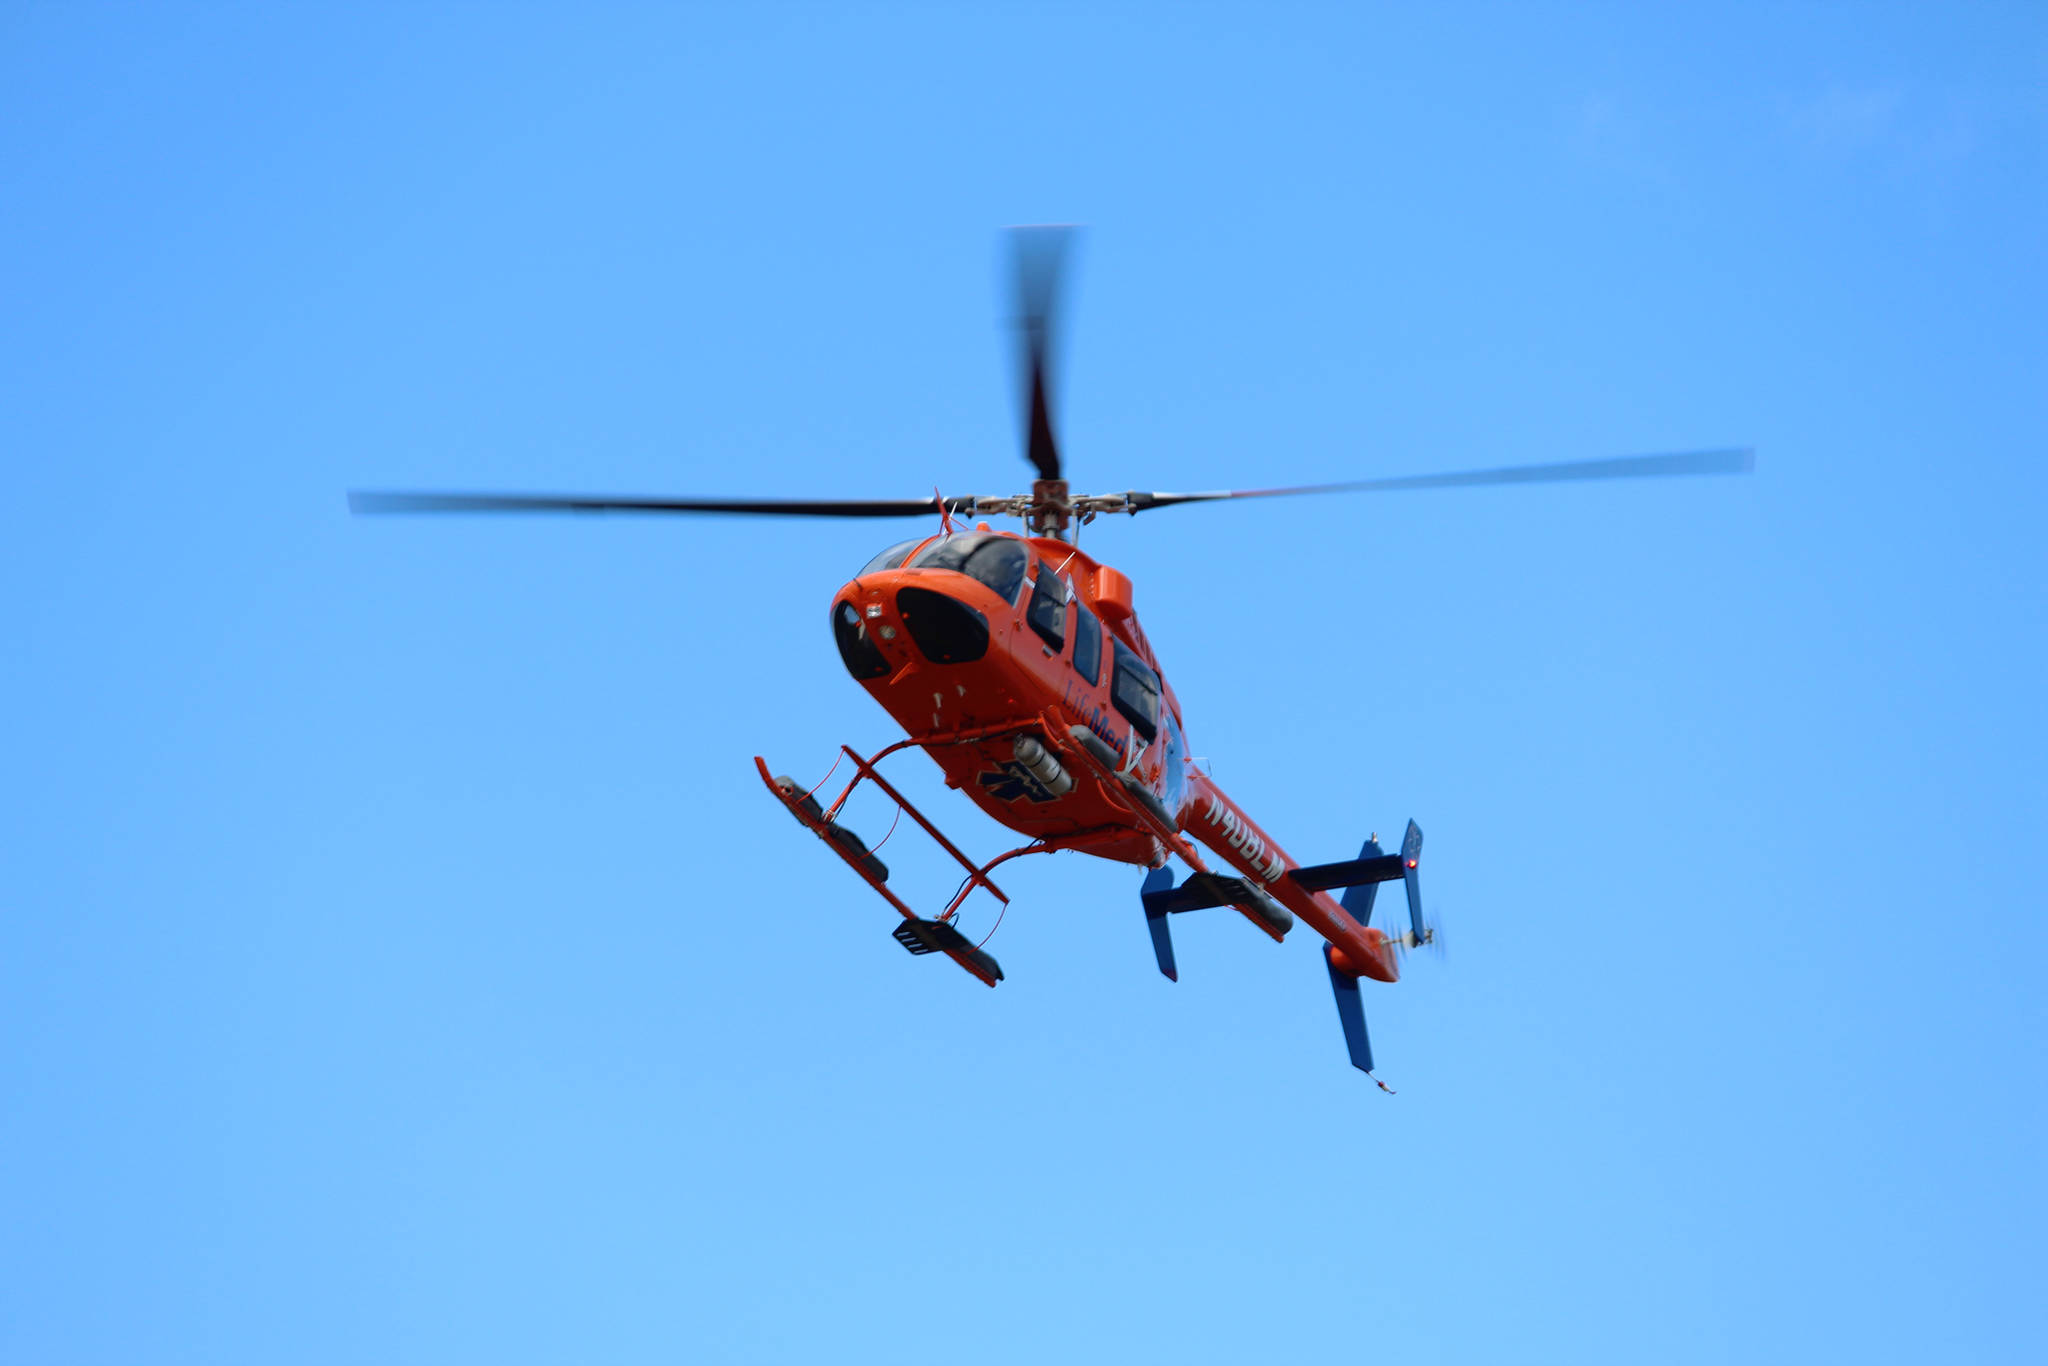 A LifeMed helicopter based out of Soldotna prepares to land in the field behind Chapman School on Friday, May 11, 2018 in Anchor Point, Alaska as part of a demonstration for students. (Photo by Megan Pacer/Homer News)